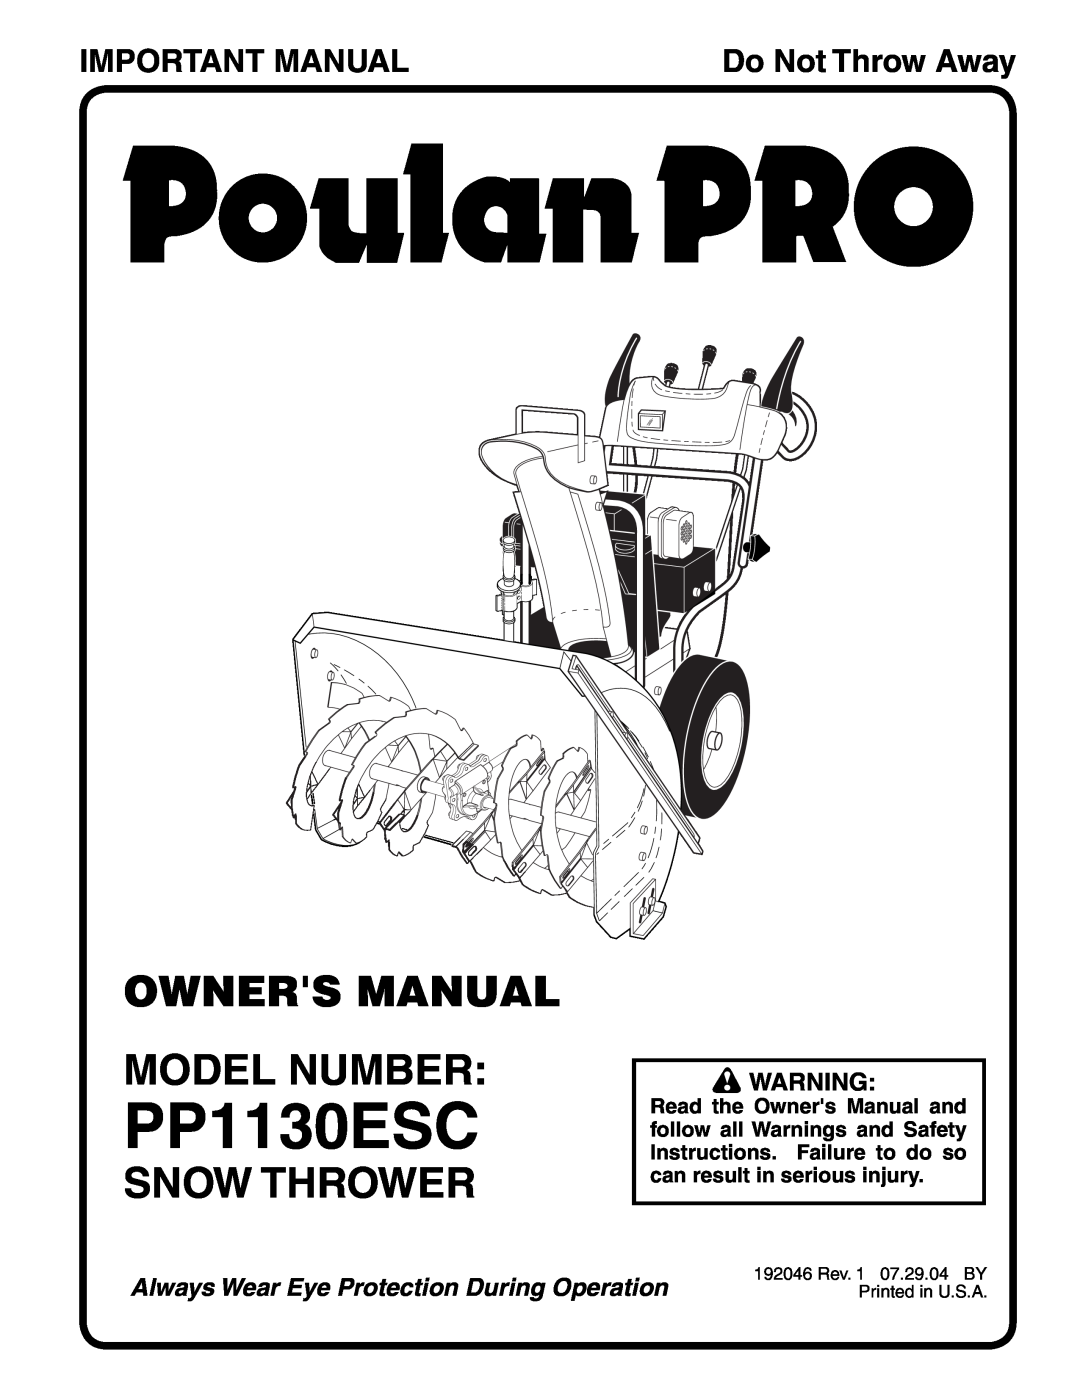 Poulan PP1130ESC owner manual Owners Manual Model Number, Snow Thrower, Important Manual, Do Not Throw Away 